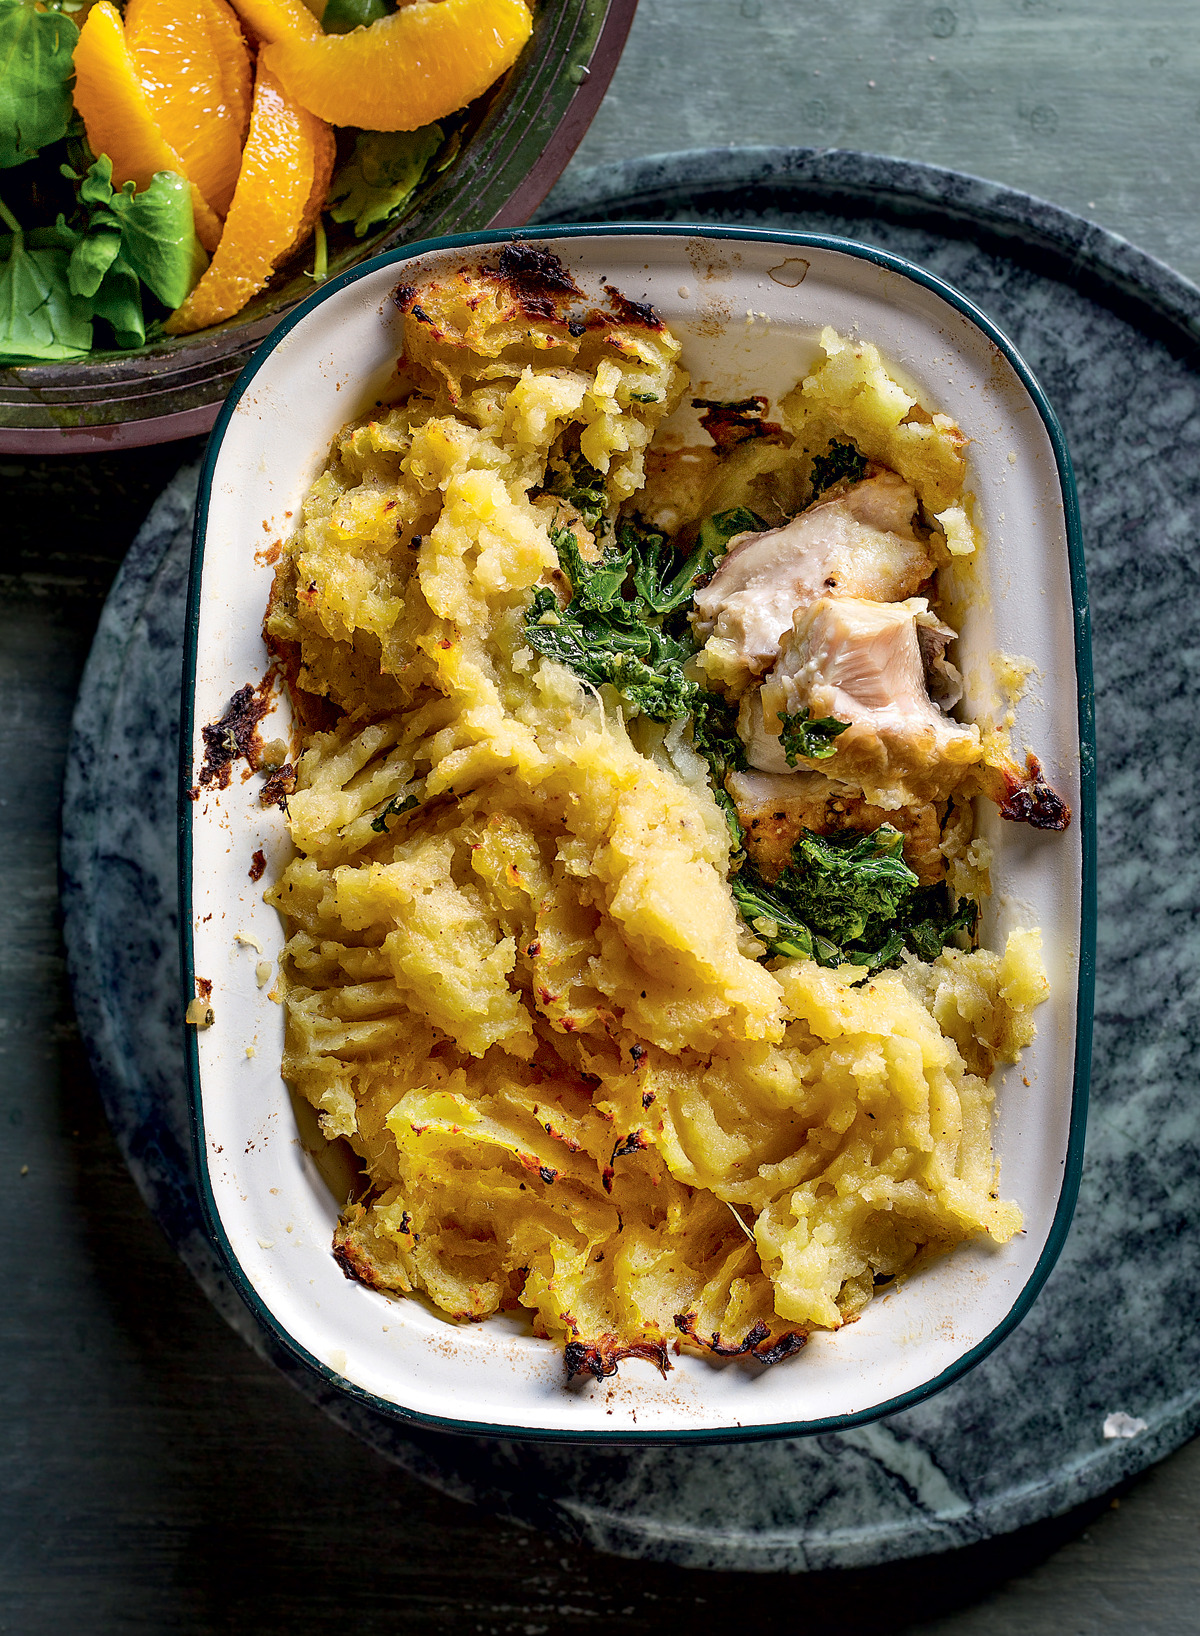 Fish-and-kale pie with sweet potato topping recipe